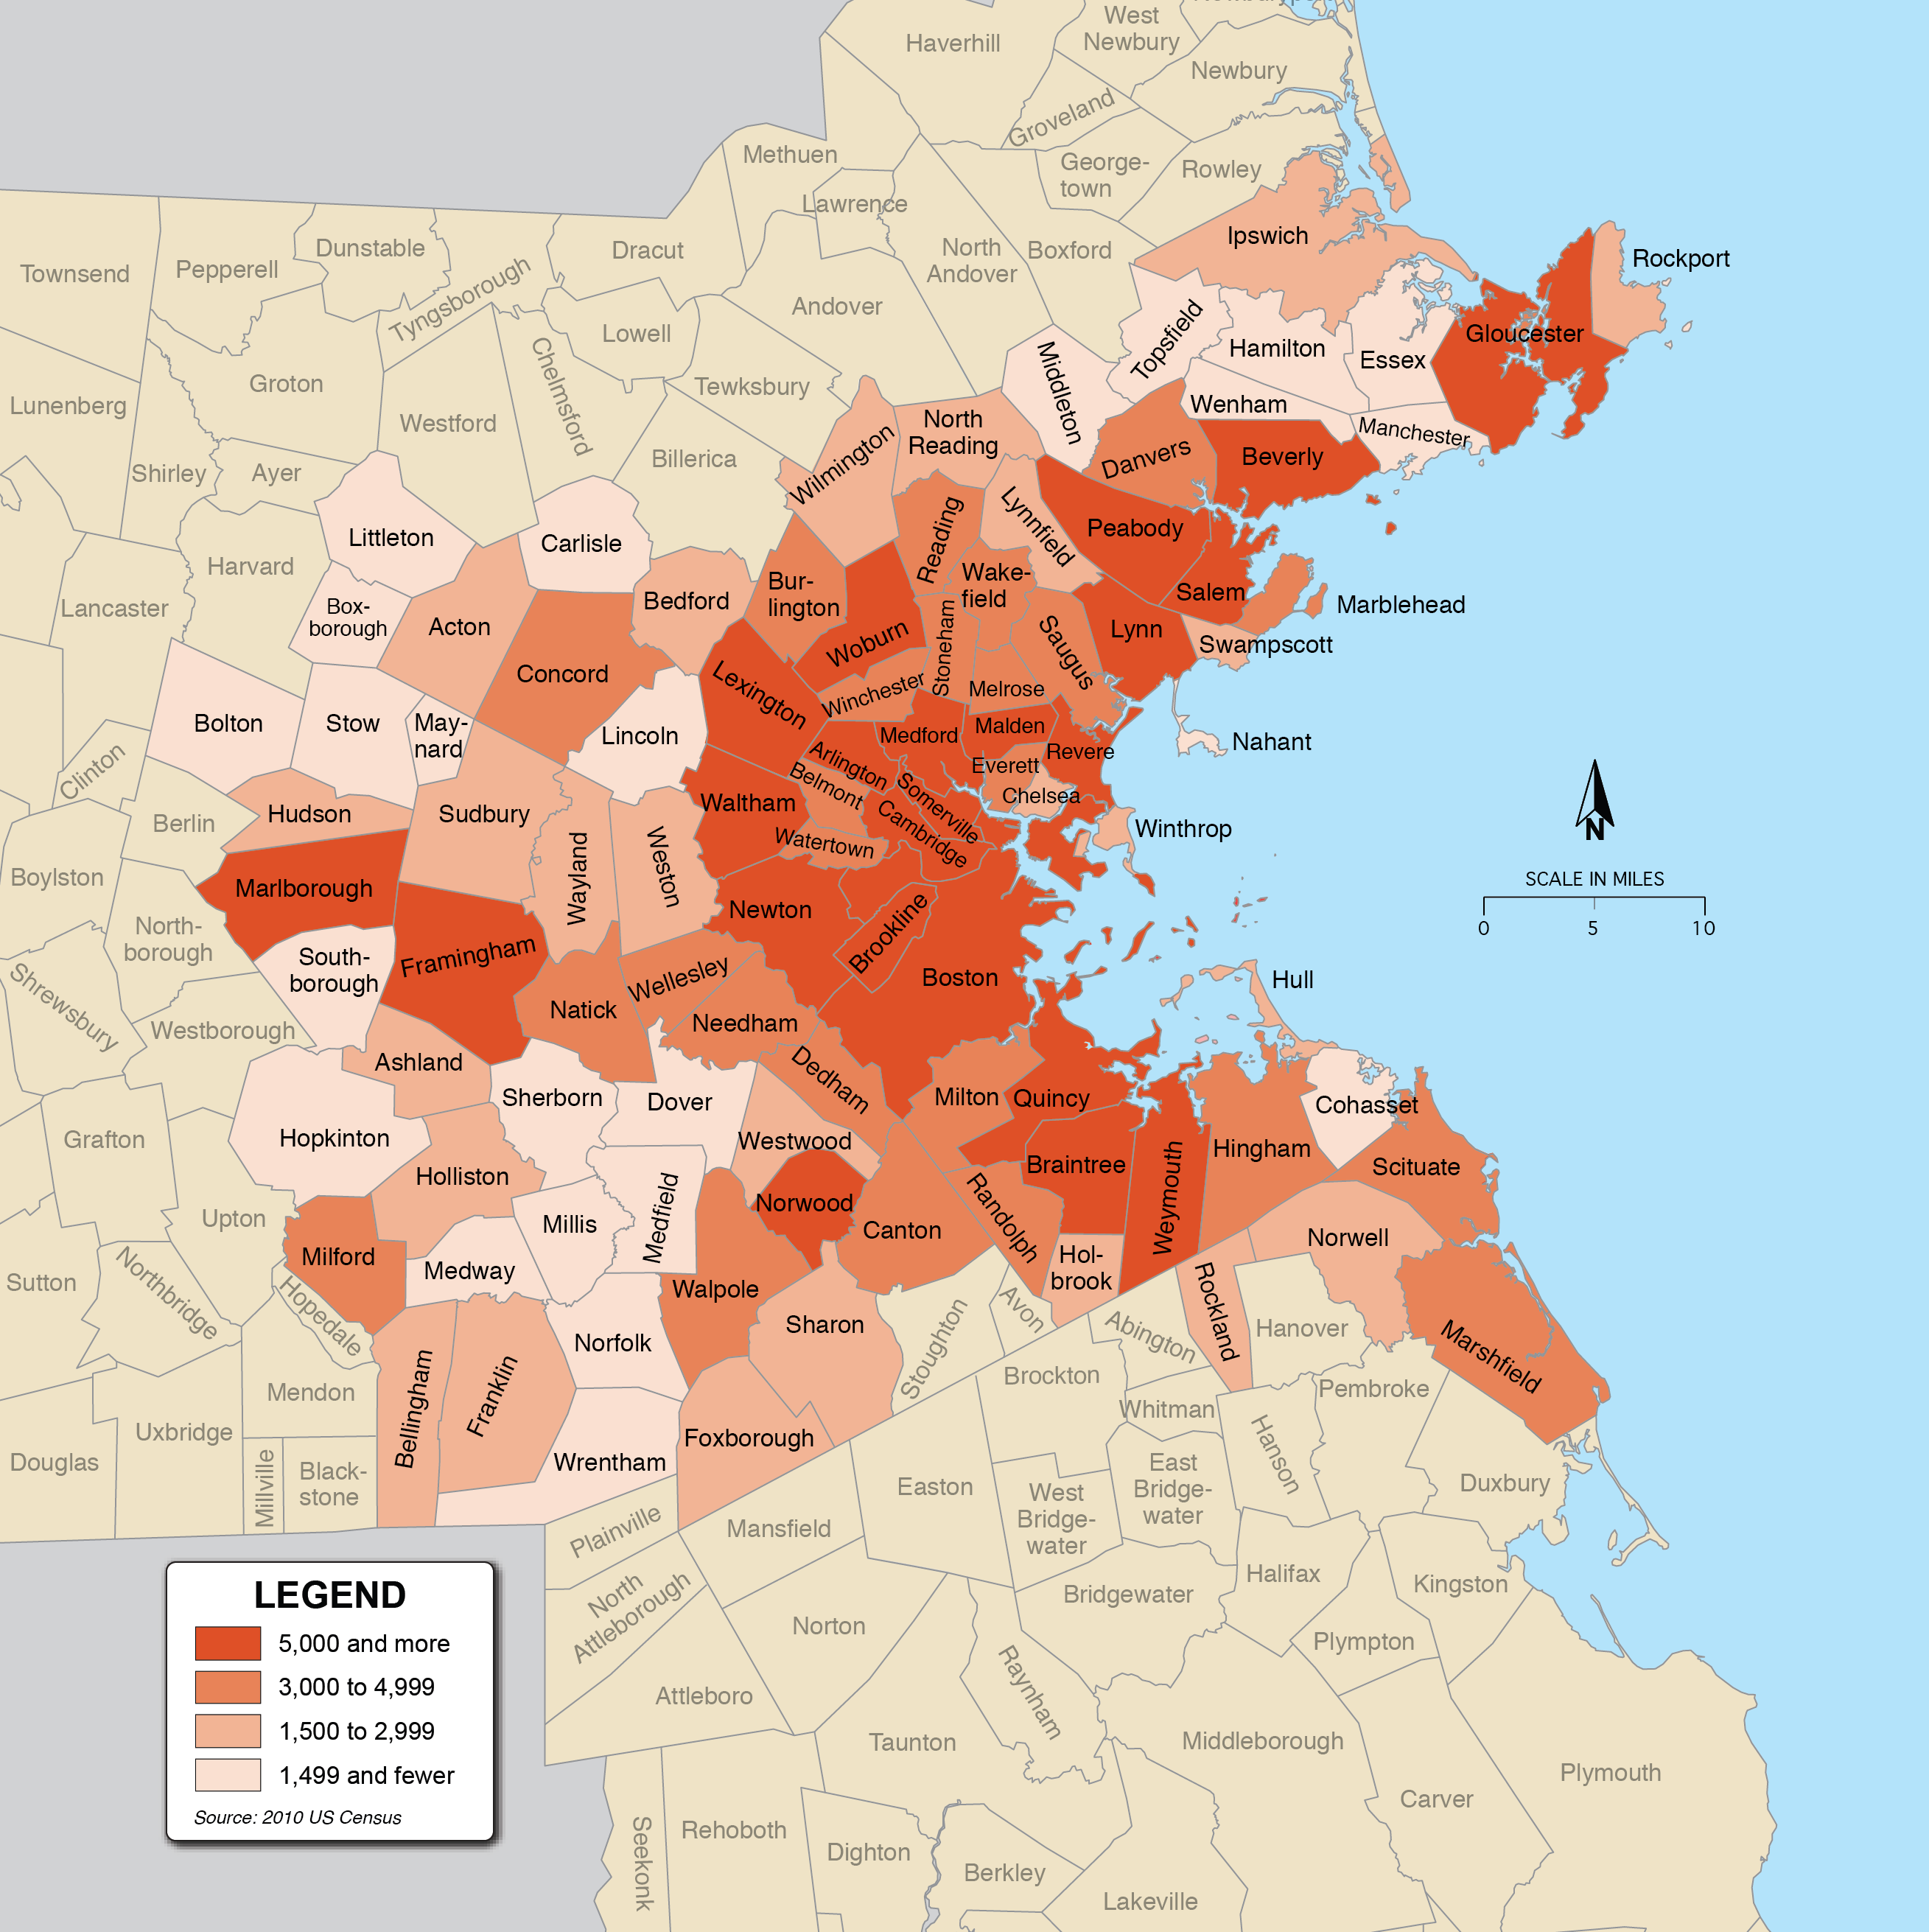 This map shows the number of people ages 65 and older in the Boston region by municipality.